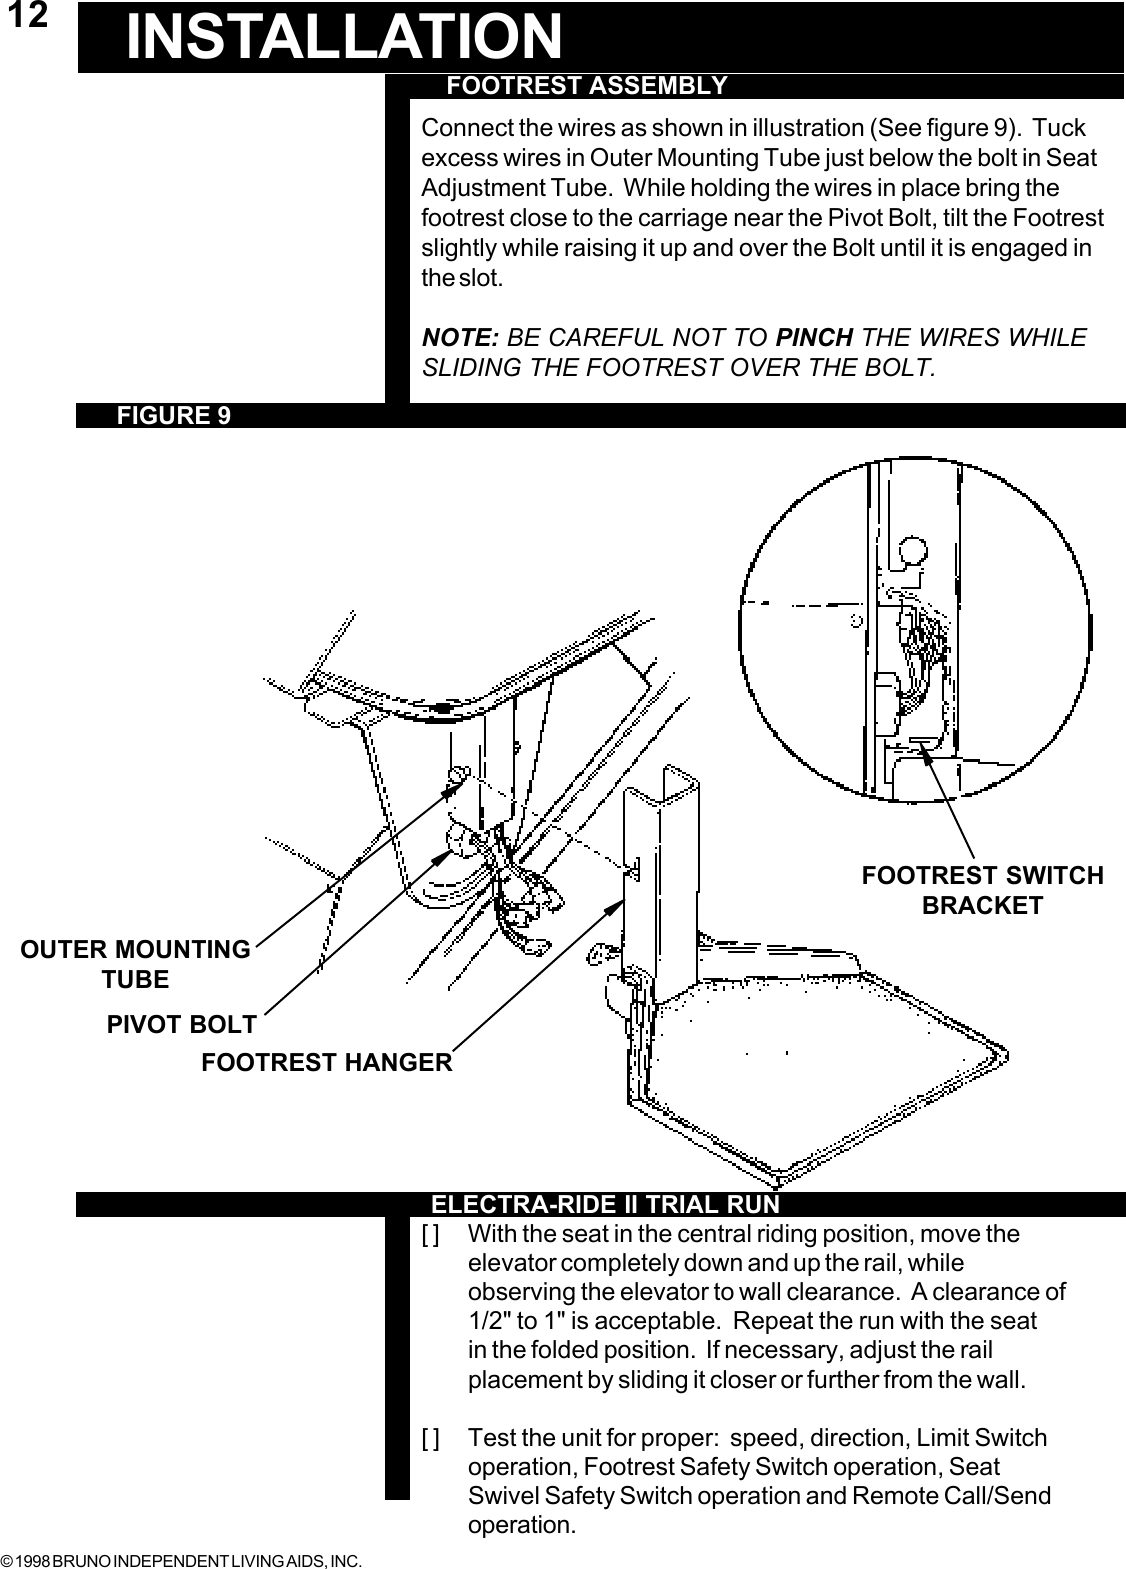 © 1998 BRUNO INDEPENDENT LIVING AIDS, INC.12OUTER MOUNTINGTUBE FOOTREST ASSEMBLYFIGURE 9INSTALLATIONConnect the wires as shown in illustration (See figure 9).  Tuckexcess wires in Outer Mounting Tube just below the bolt in SeatAdjustment Tube.  While holding the wires in place bring thefootrest close to the carriage near the Pivot Bolt, tilt the Footrestslightly while raising it up and over the Bolt until it is engaged inthe slot.NOTE: BE CAREFUL NOT TO PINCH THE WIRES WHILESLIDING THE FOOTREST OVER THE BOLT.[ ] With the seat in the central riding position, move theelevator completely down and up the rail, whileobserving the elevator to wall clearance.  A clearance of1/2&quot; to 1&quot; is acceptable.  Repeat the run with the seatin the folded position.  If necessary, adjust the railplacement by sliding it closer or further from the wall.[ ] Test the unit for proper:  speed, direction, Limit Switchoperation, Footrest Safety Switch operation, SeatSwivel Safety Switch operation and Remote Call/Sendoperation.PIVOT BOLTFOOTREST HANGERFOOTREST SWITCHBRACKETELECTRA-RIDE II TRIAL RUN